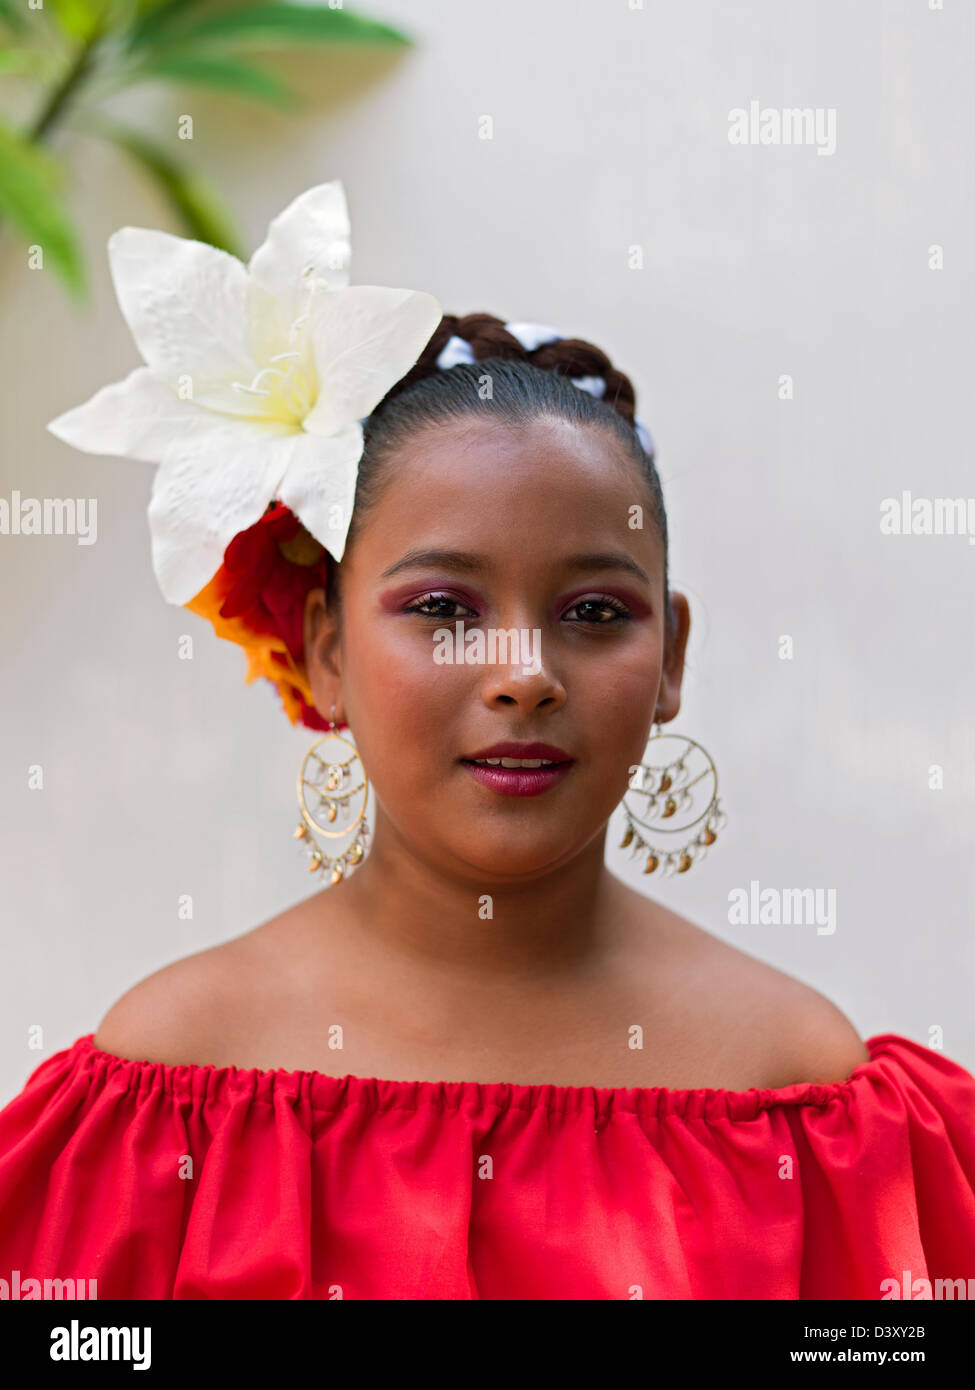 Mexico, Jalisco, Tequila, portrait of a young Mexican girl dancer in folkloric costume Stock Photo